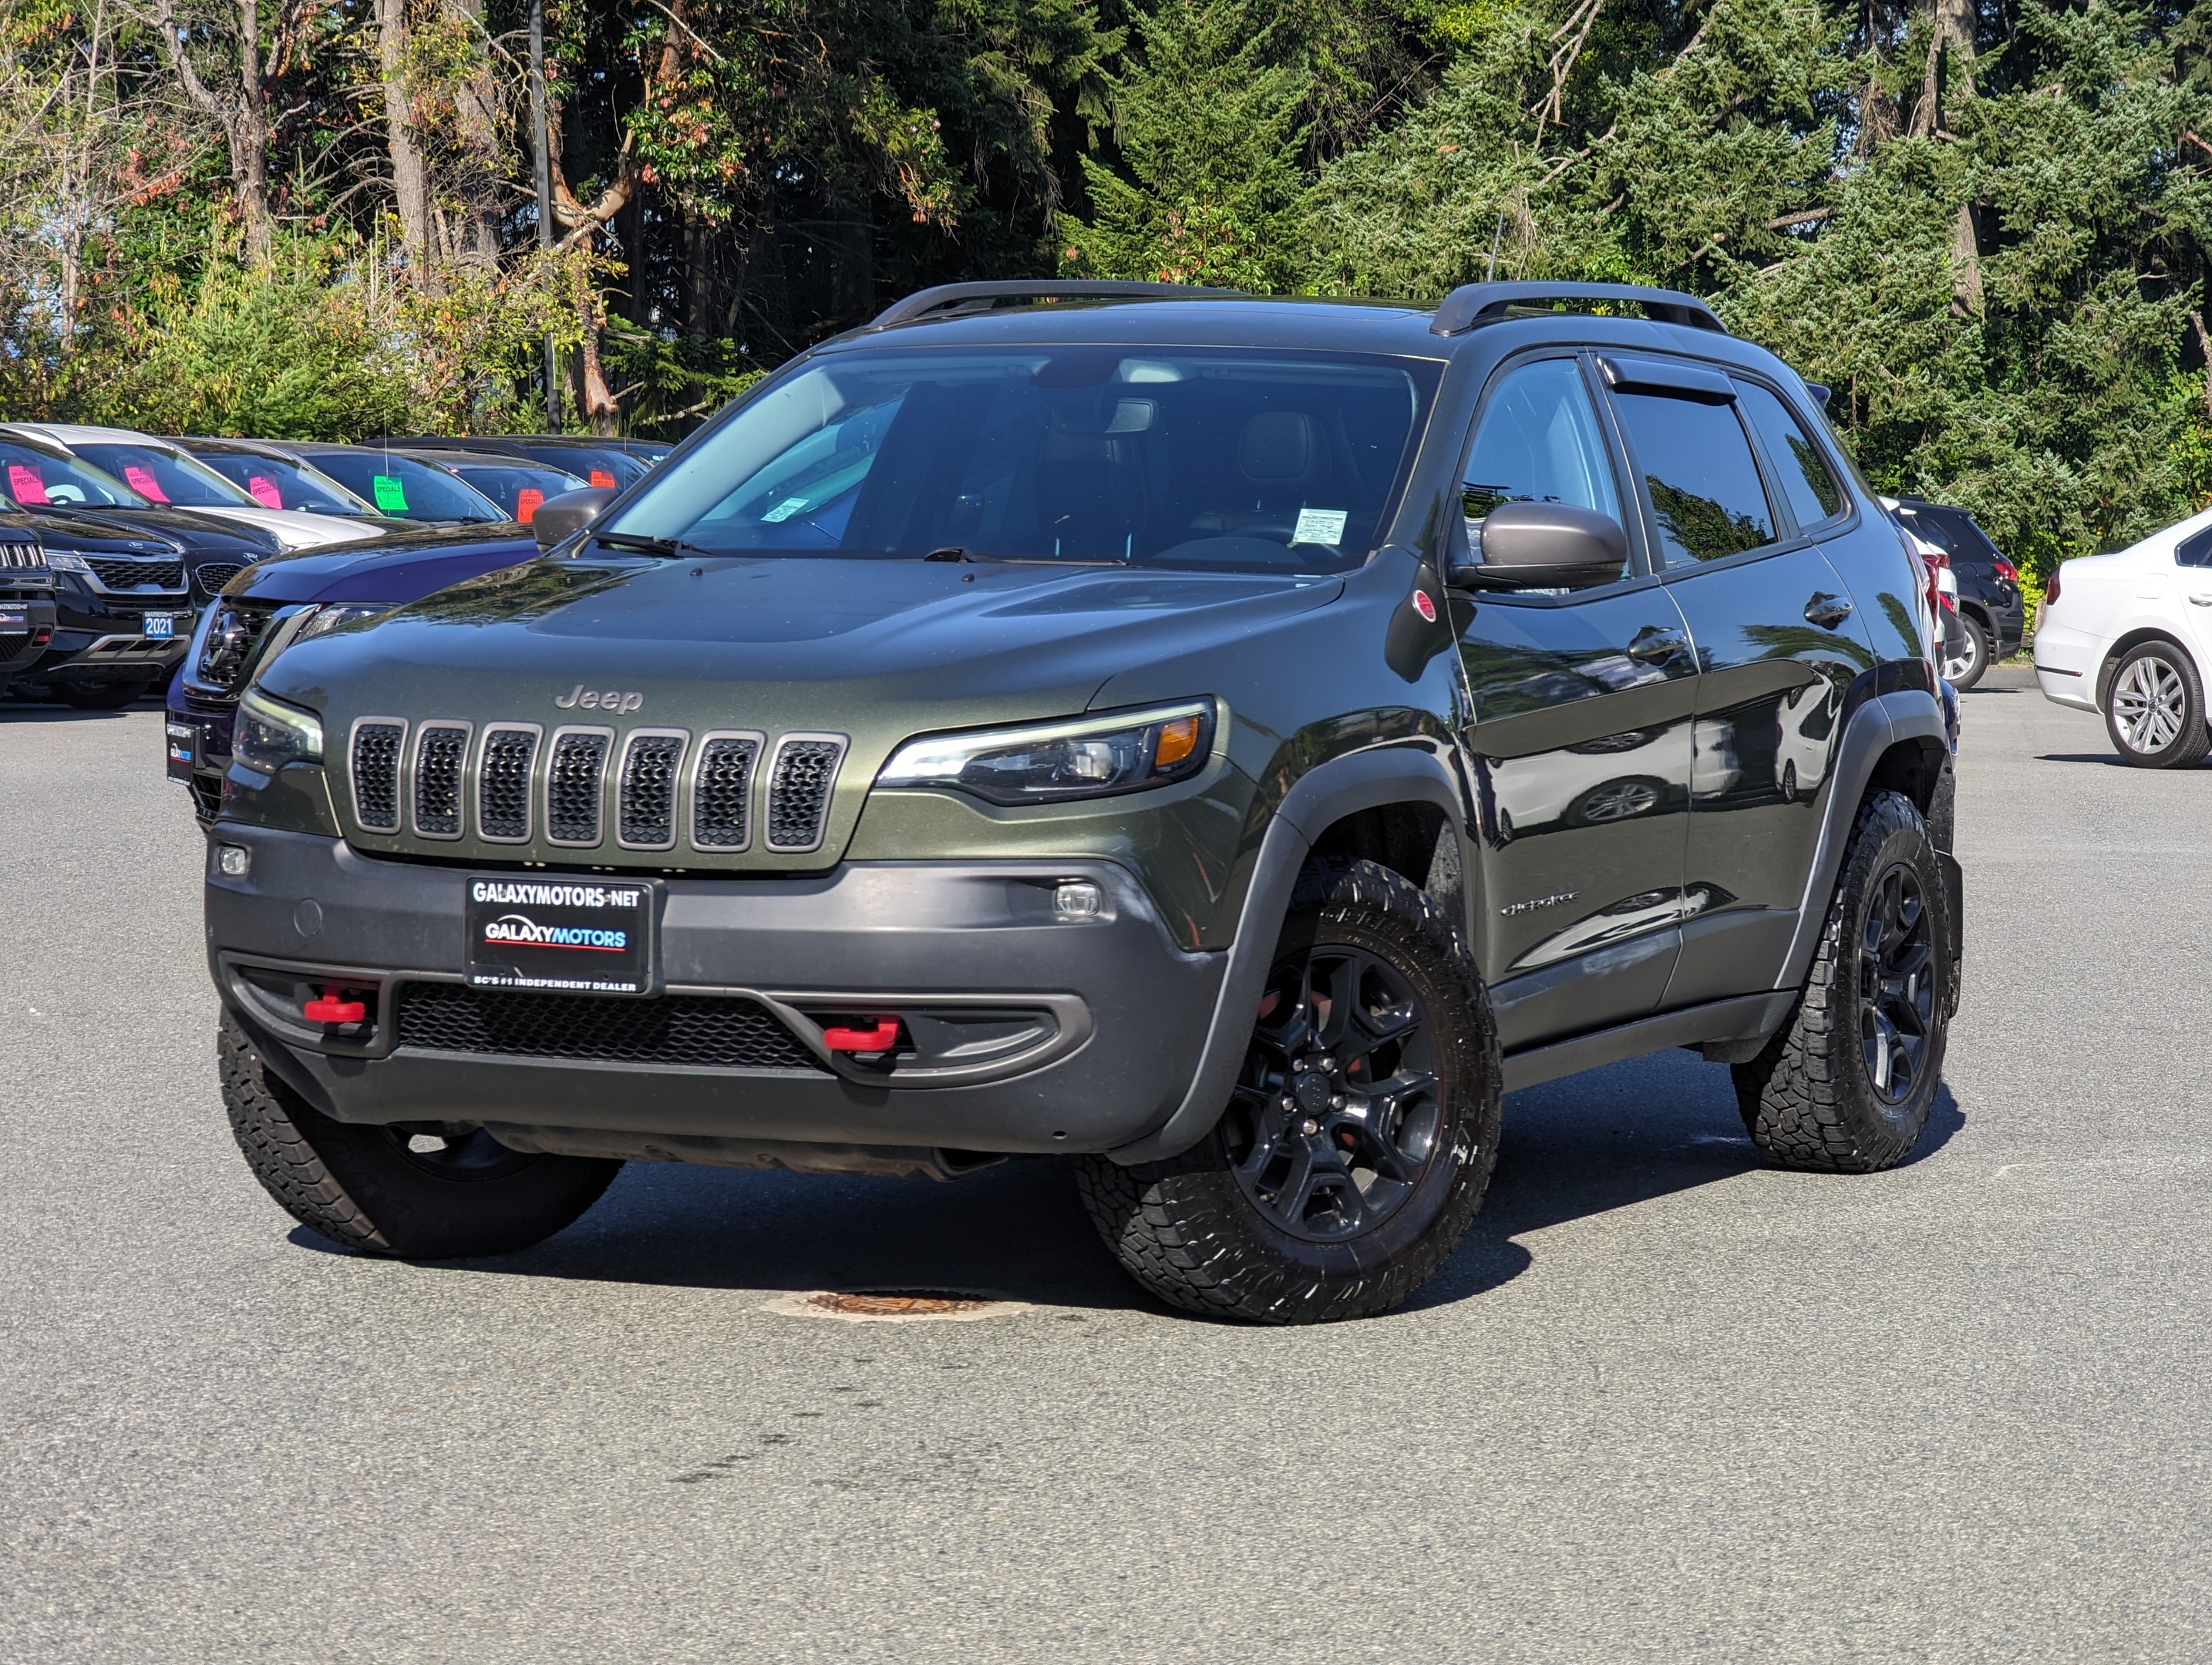 2020 Jeep Cherokee Trailhawk - No Accidents, Navigation, Sunroof